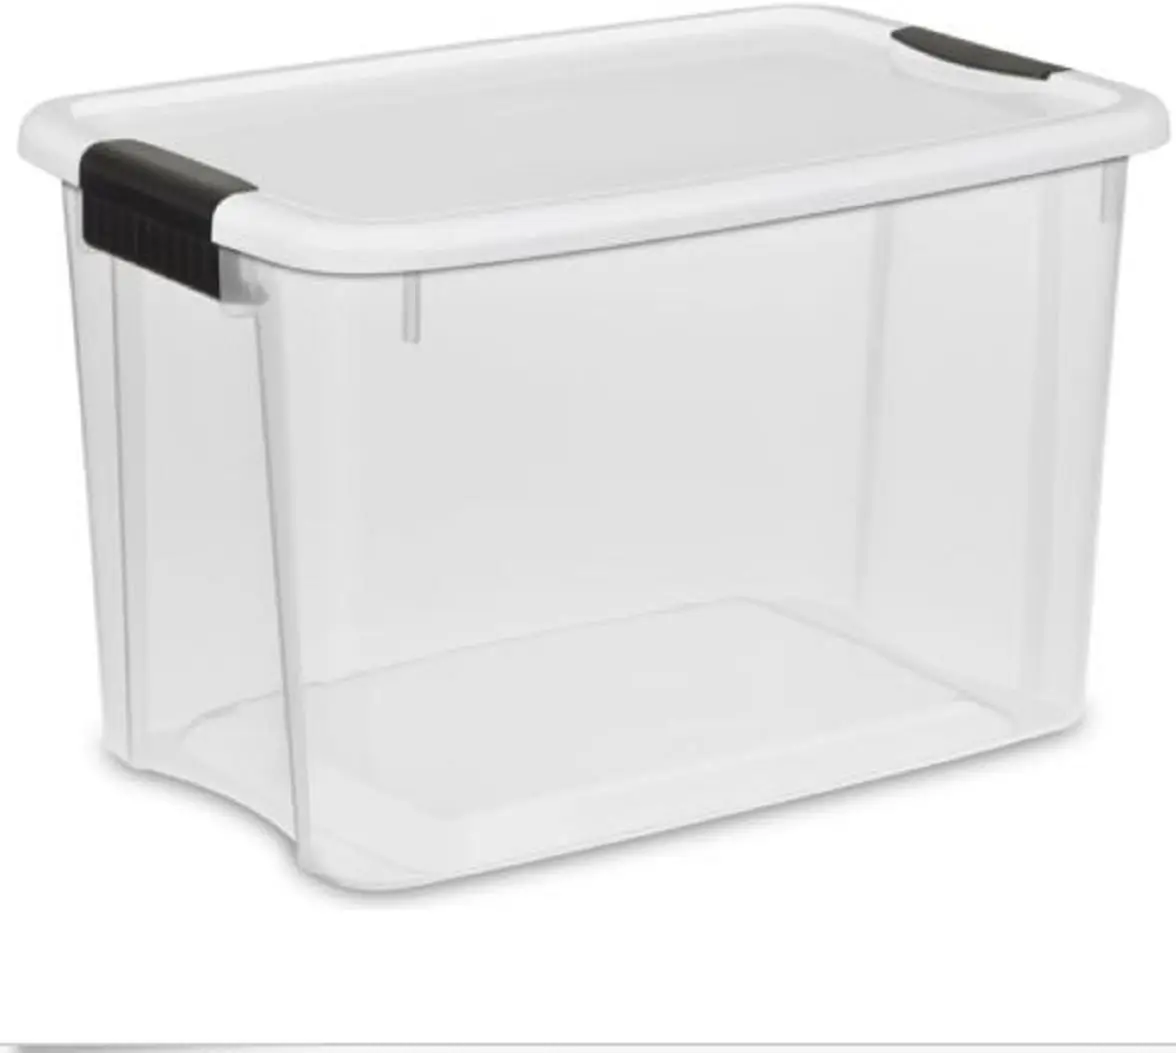 

Sterilite 30 Quart Ultra Latch Box, Stackable Storage Bin with Lid, Plastic Container with Heavy Duty Latches to Organize, Clear